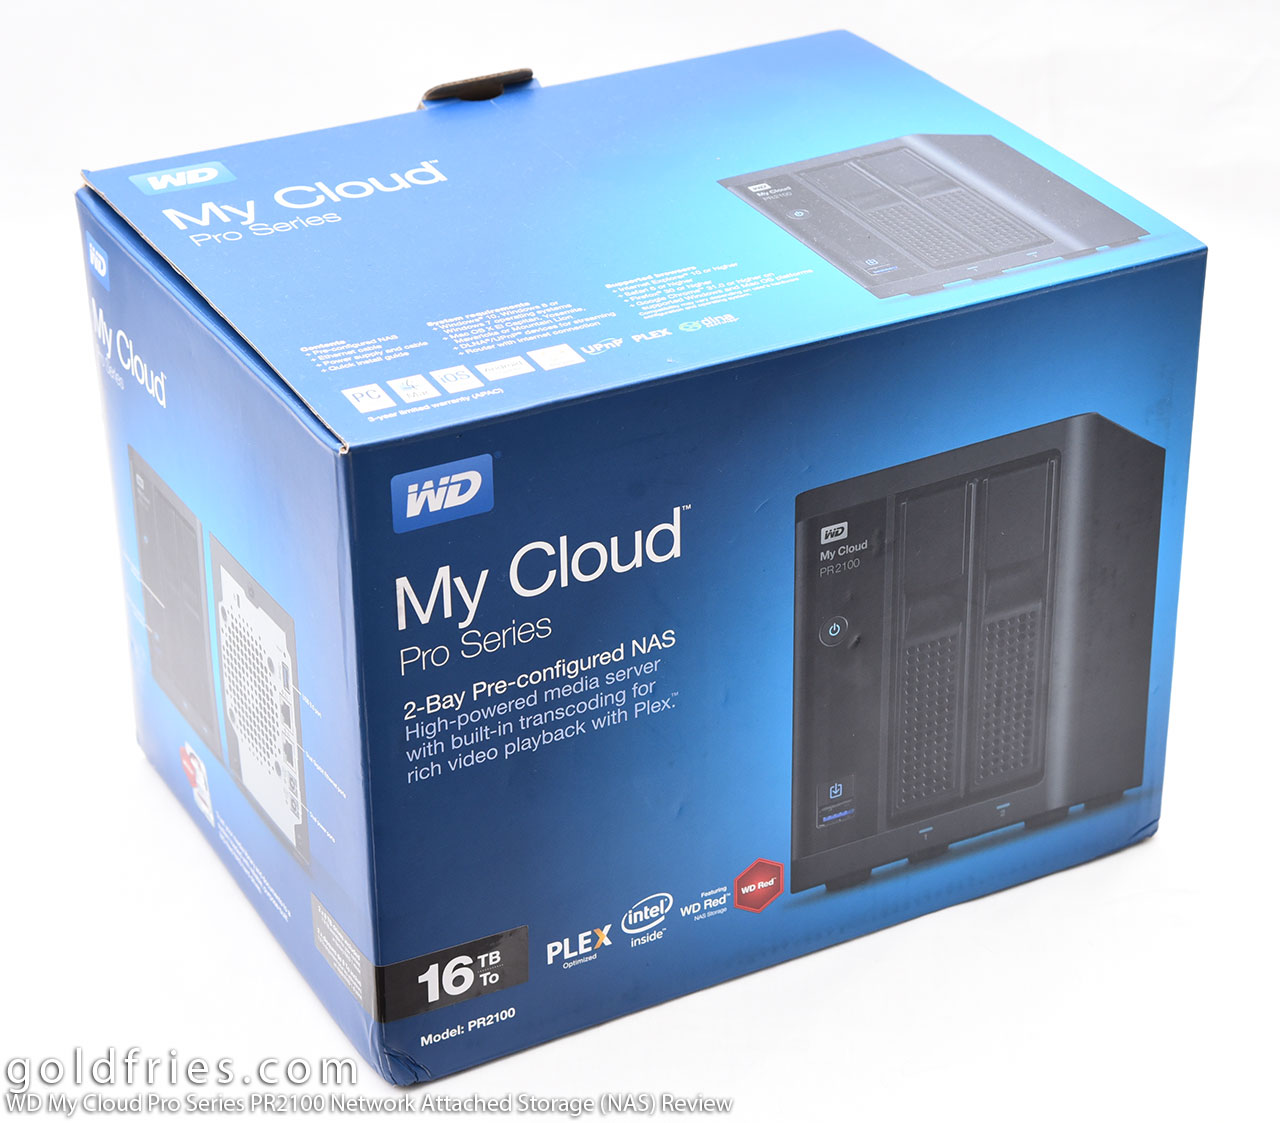 WD My Cloud Pro Series PR2100 Network Attached Storage (NAS) Review